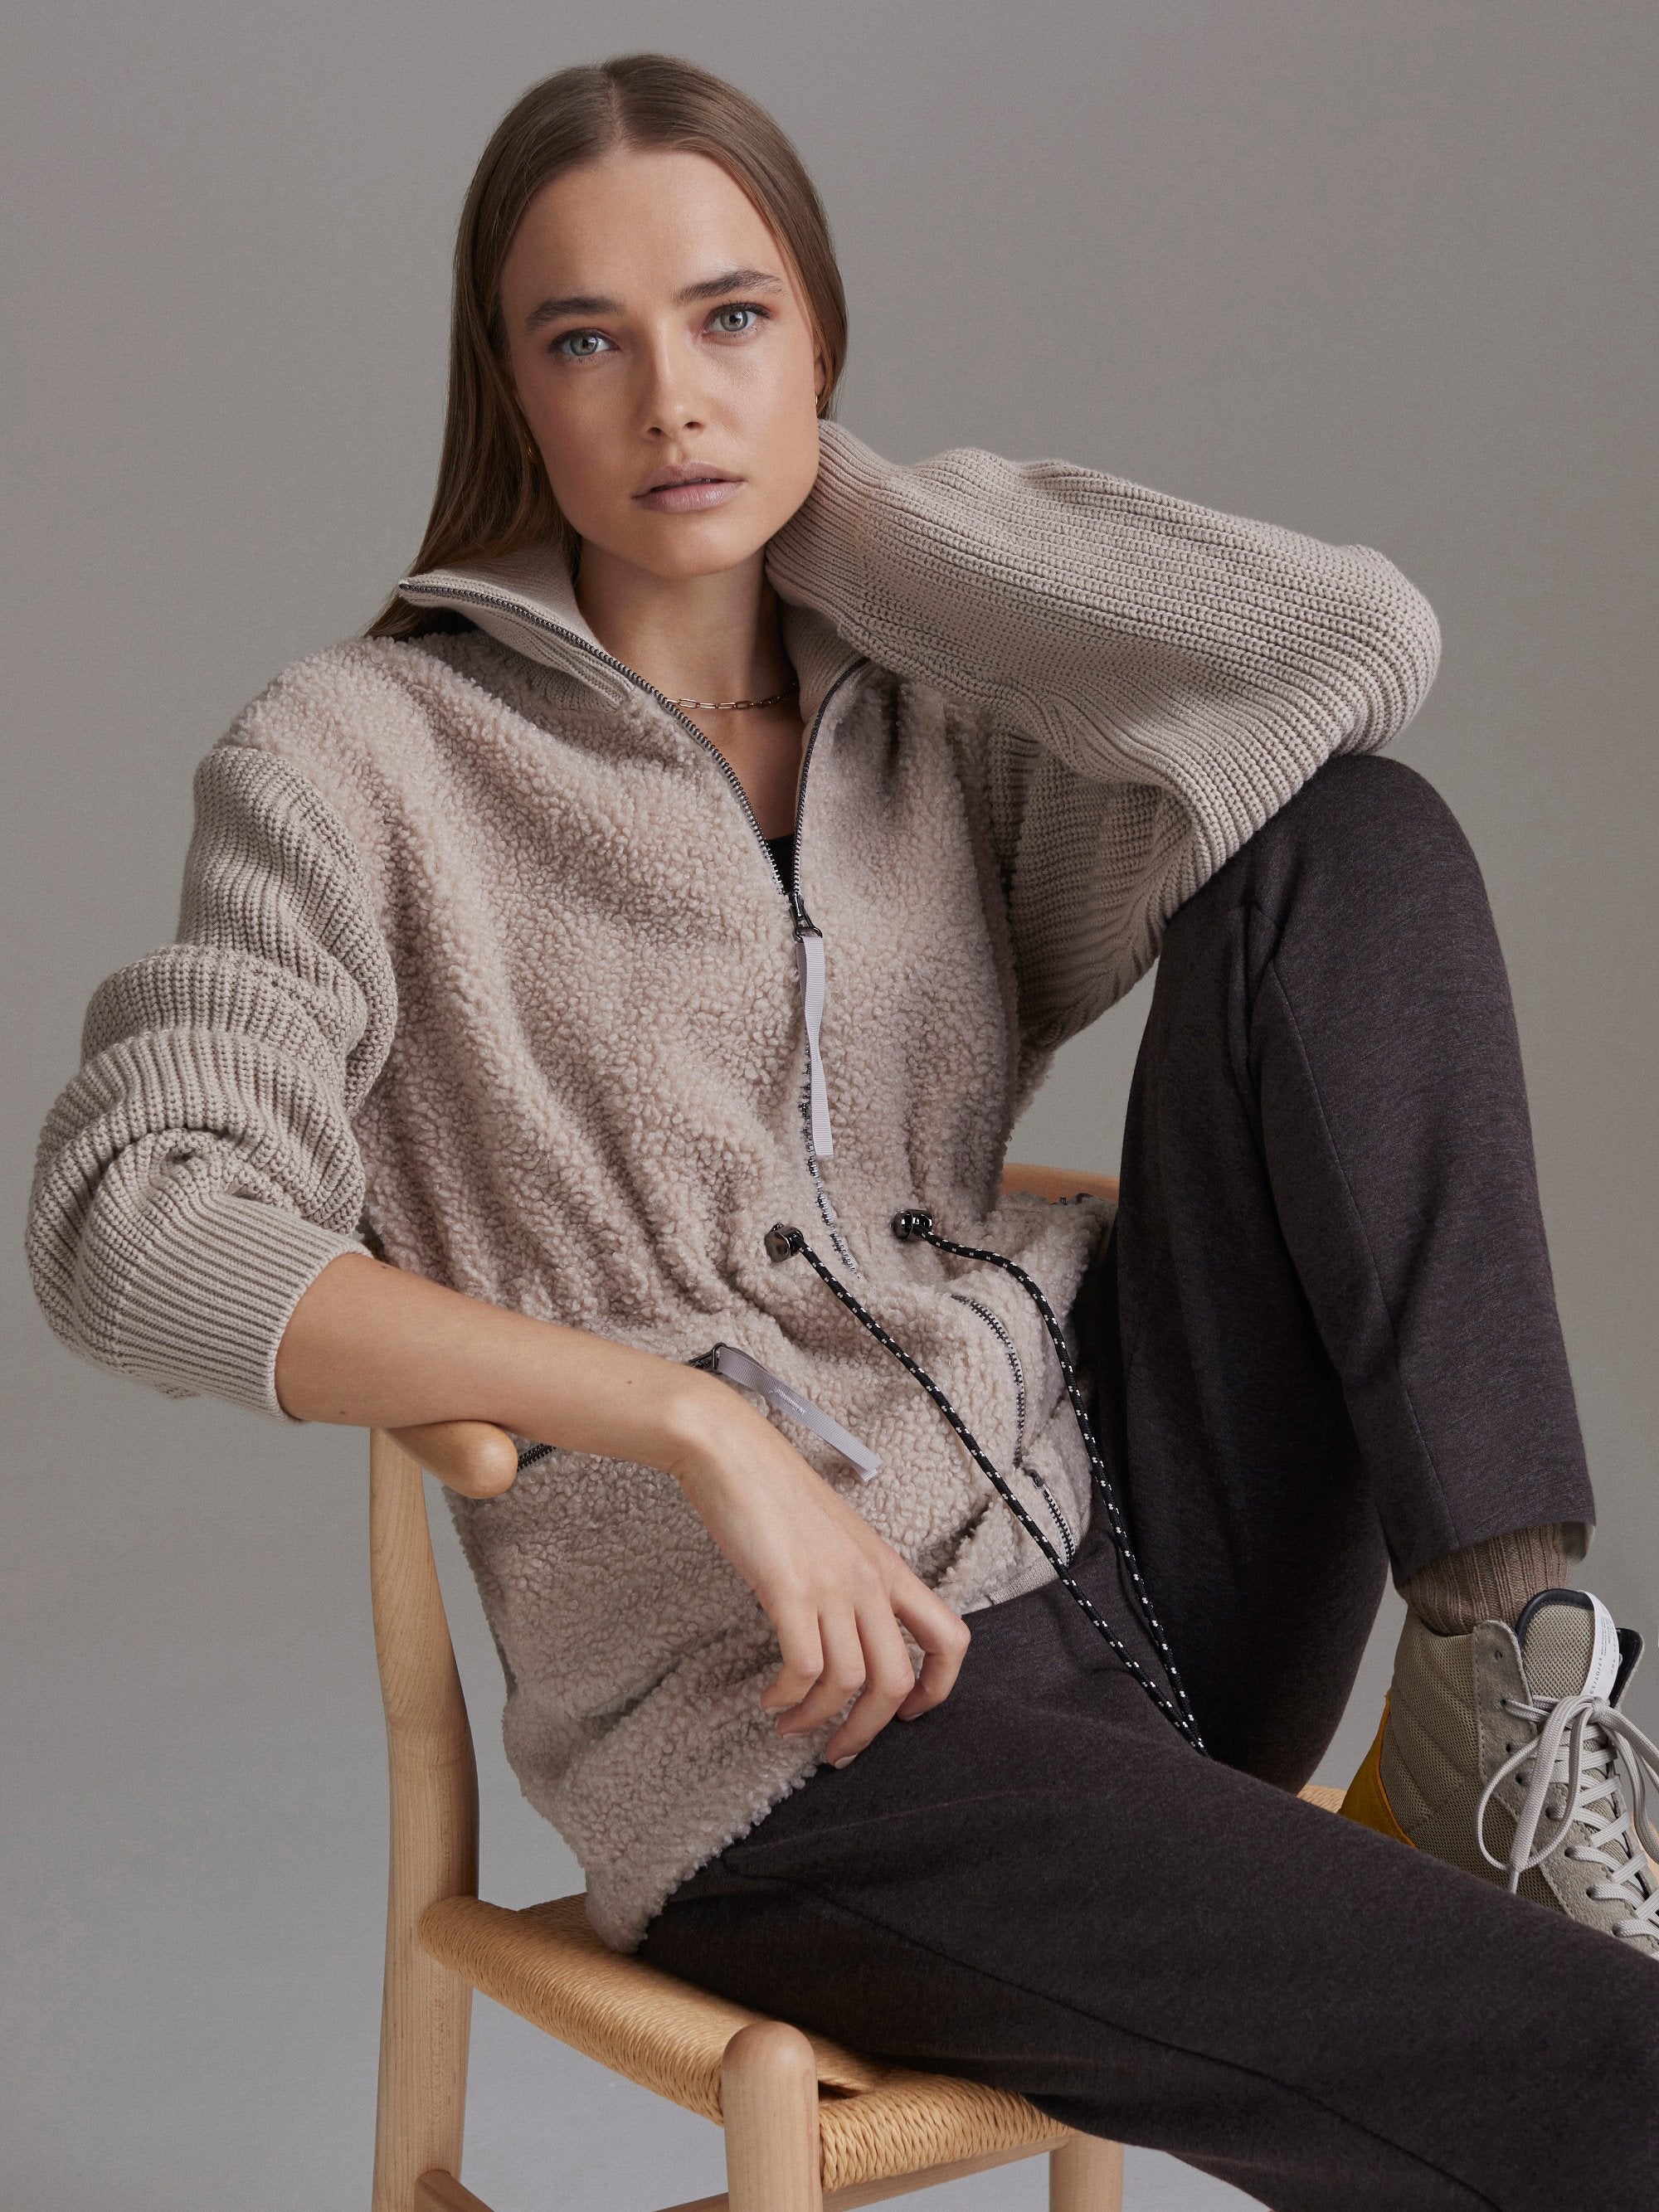 Westwood in Silver Grey | Full-Zip Sherpa Jacket with Knit Sleeves ...